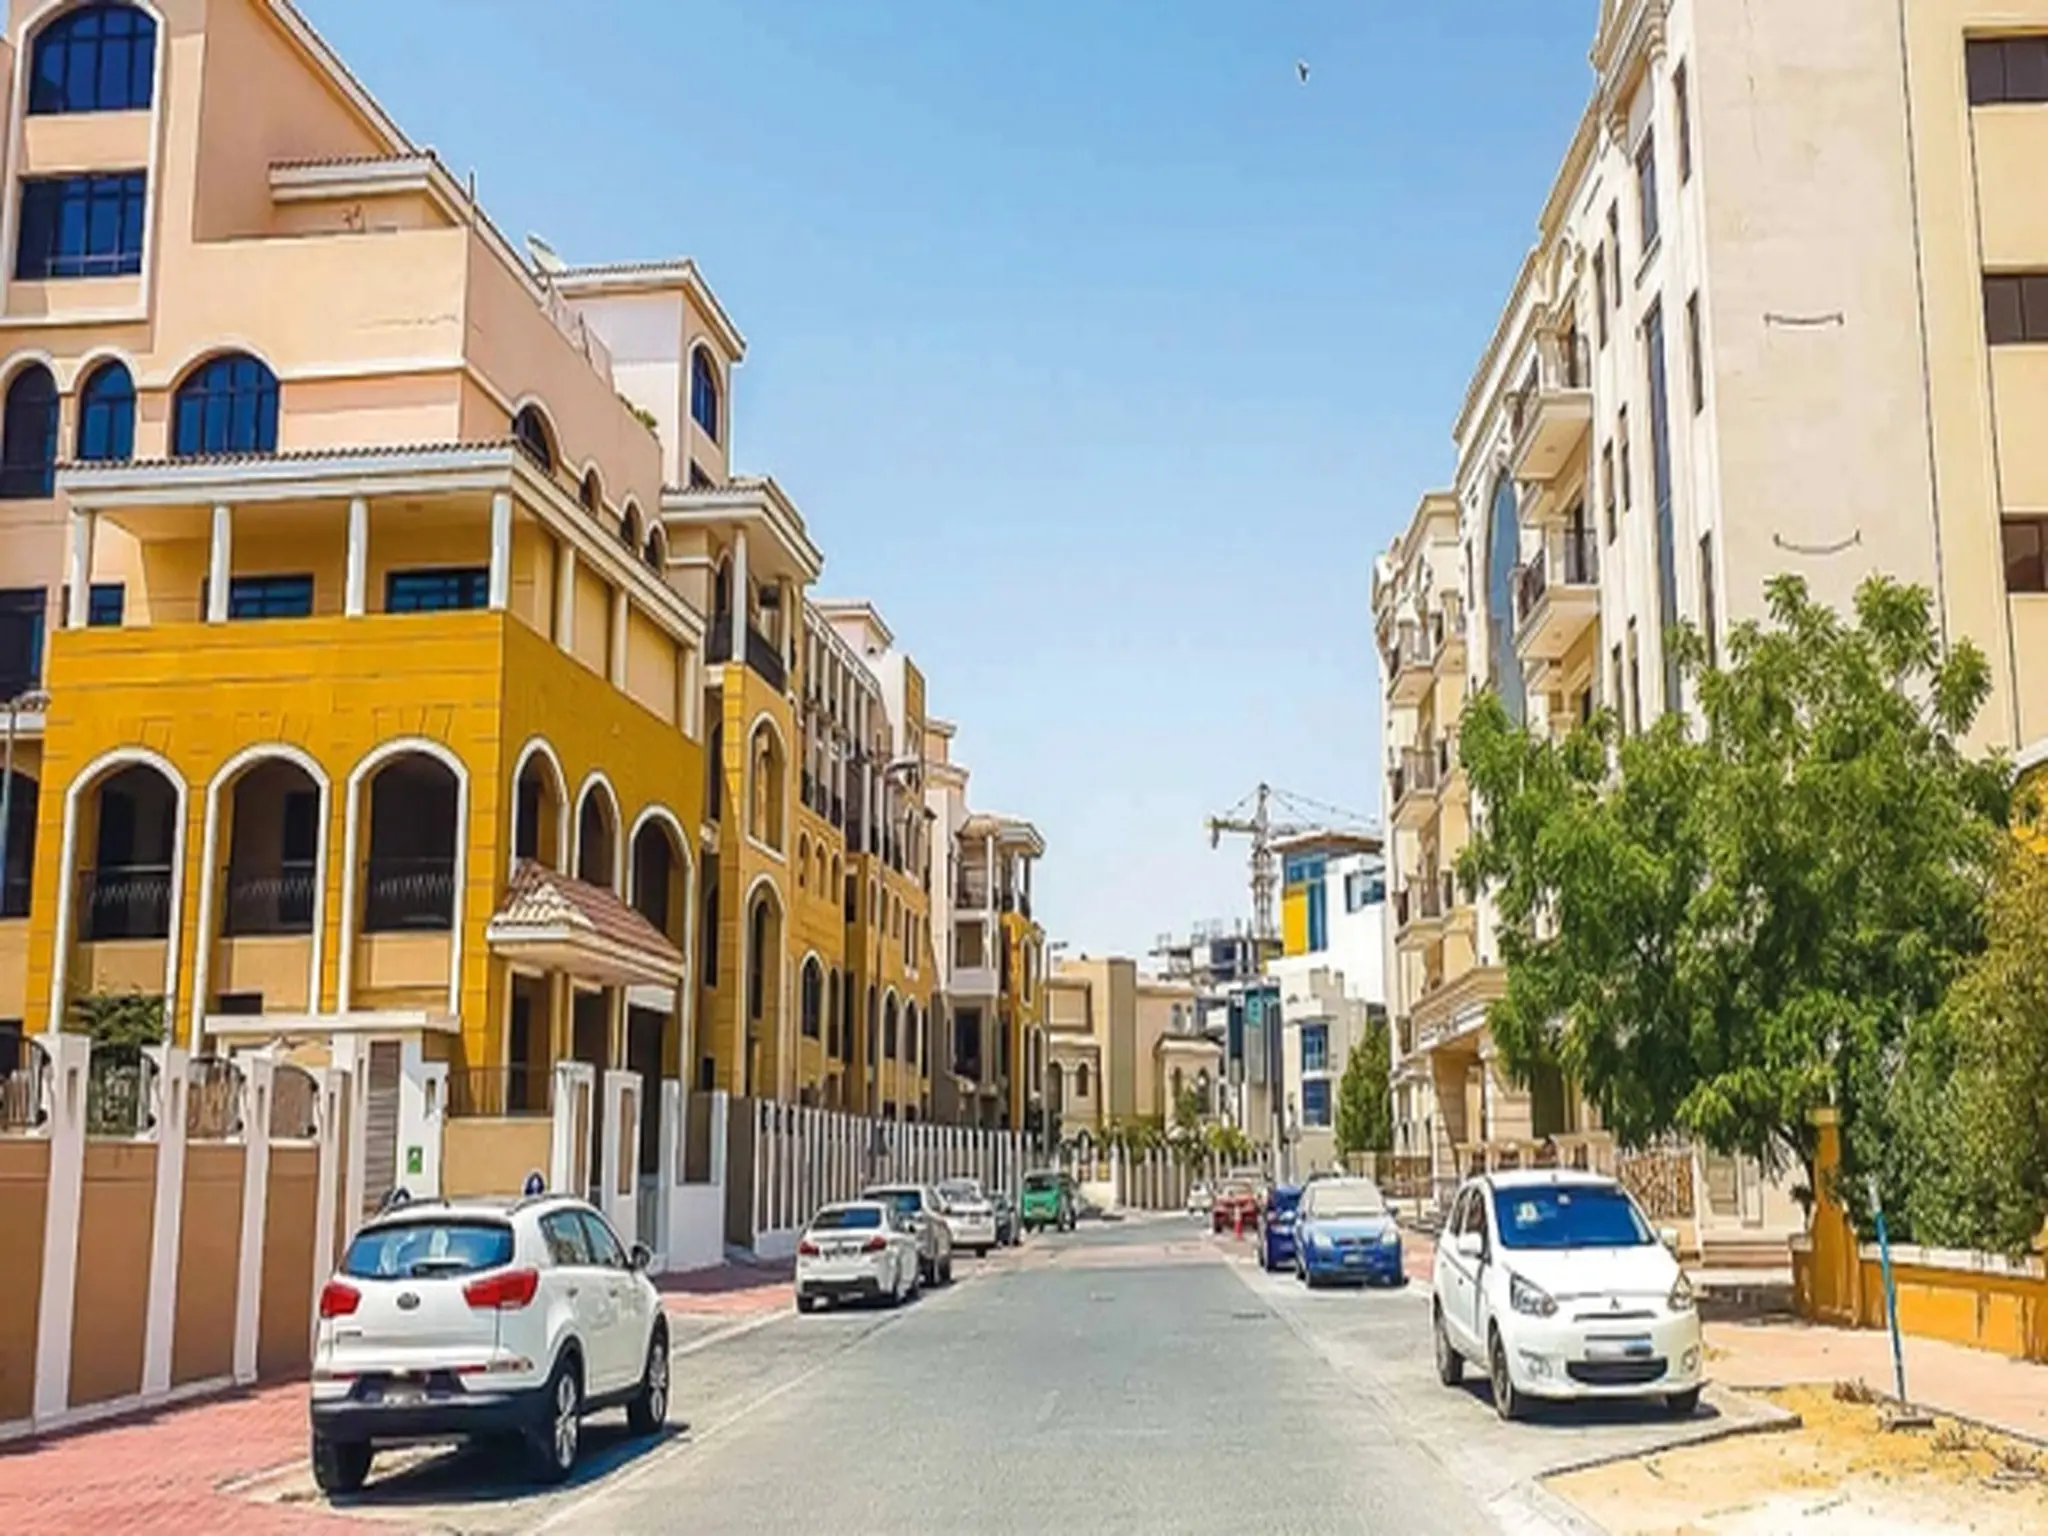 Details of the increase in housing rent prices in the UAE